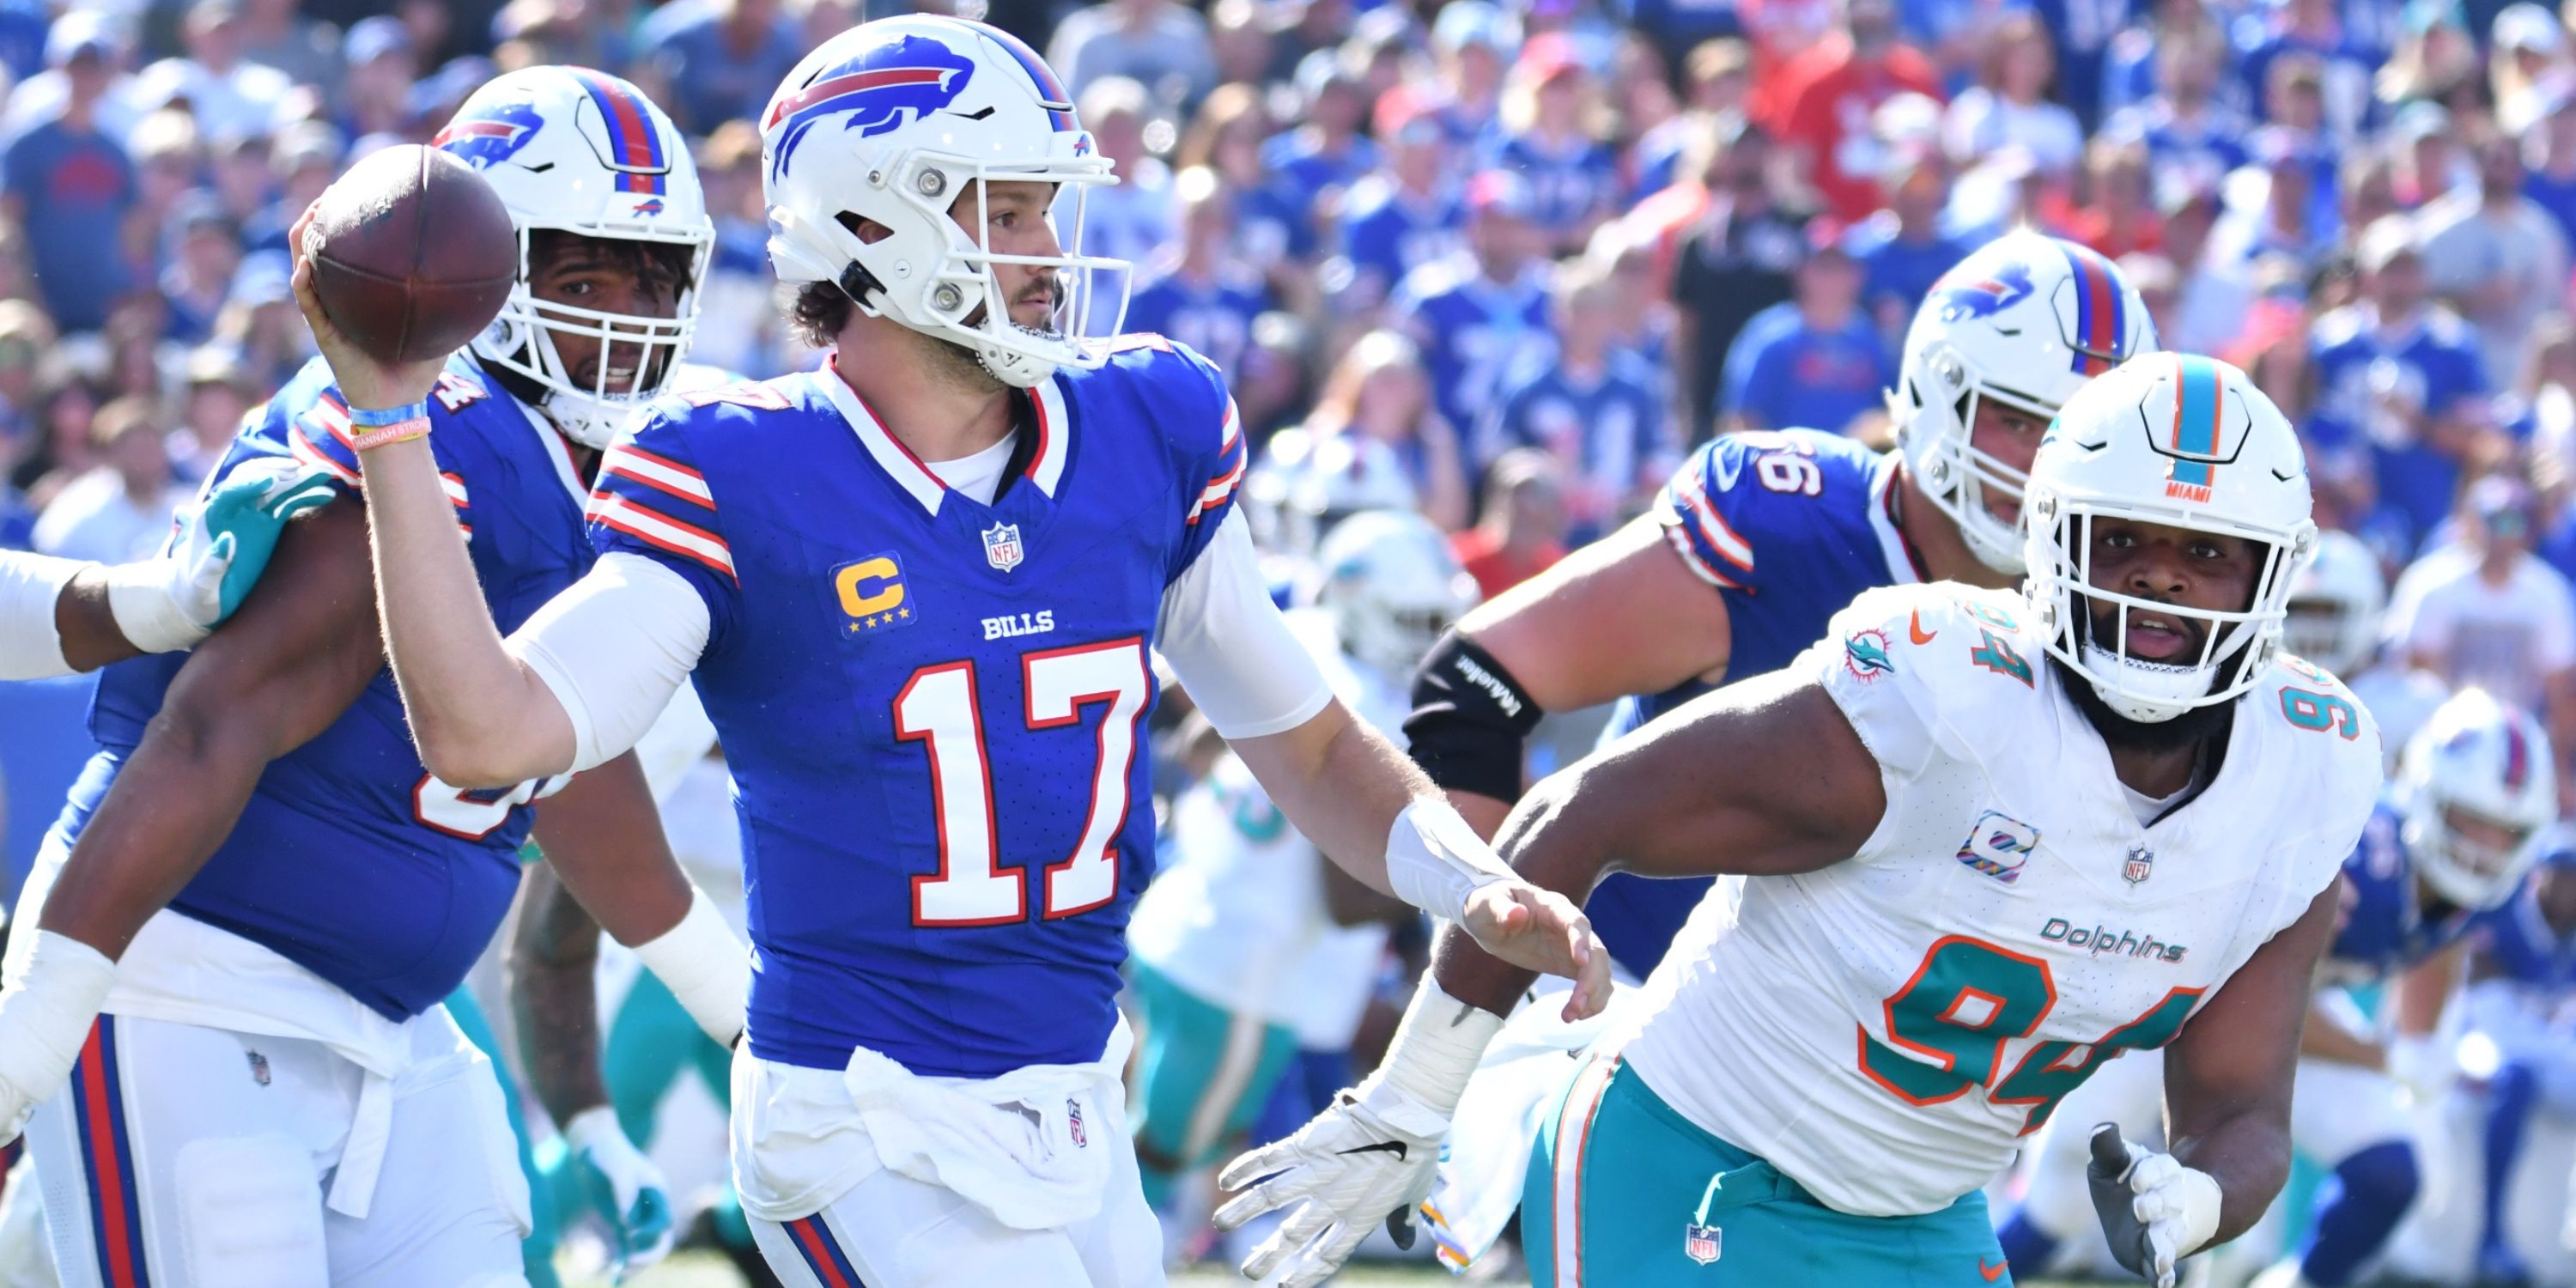 Josh Allen looks to throw a pass against the Miami Dolphins